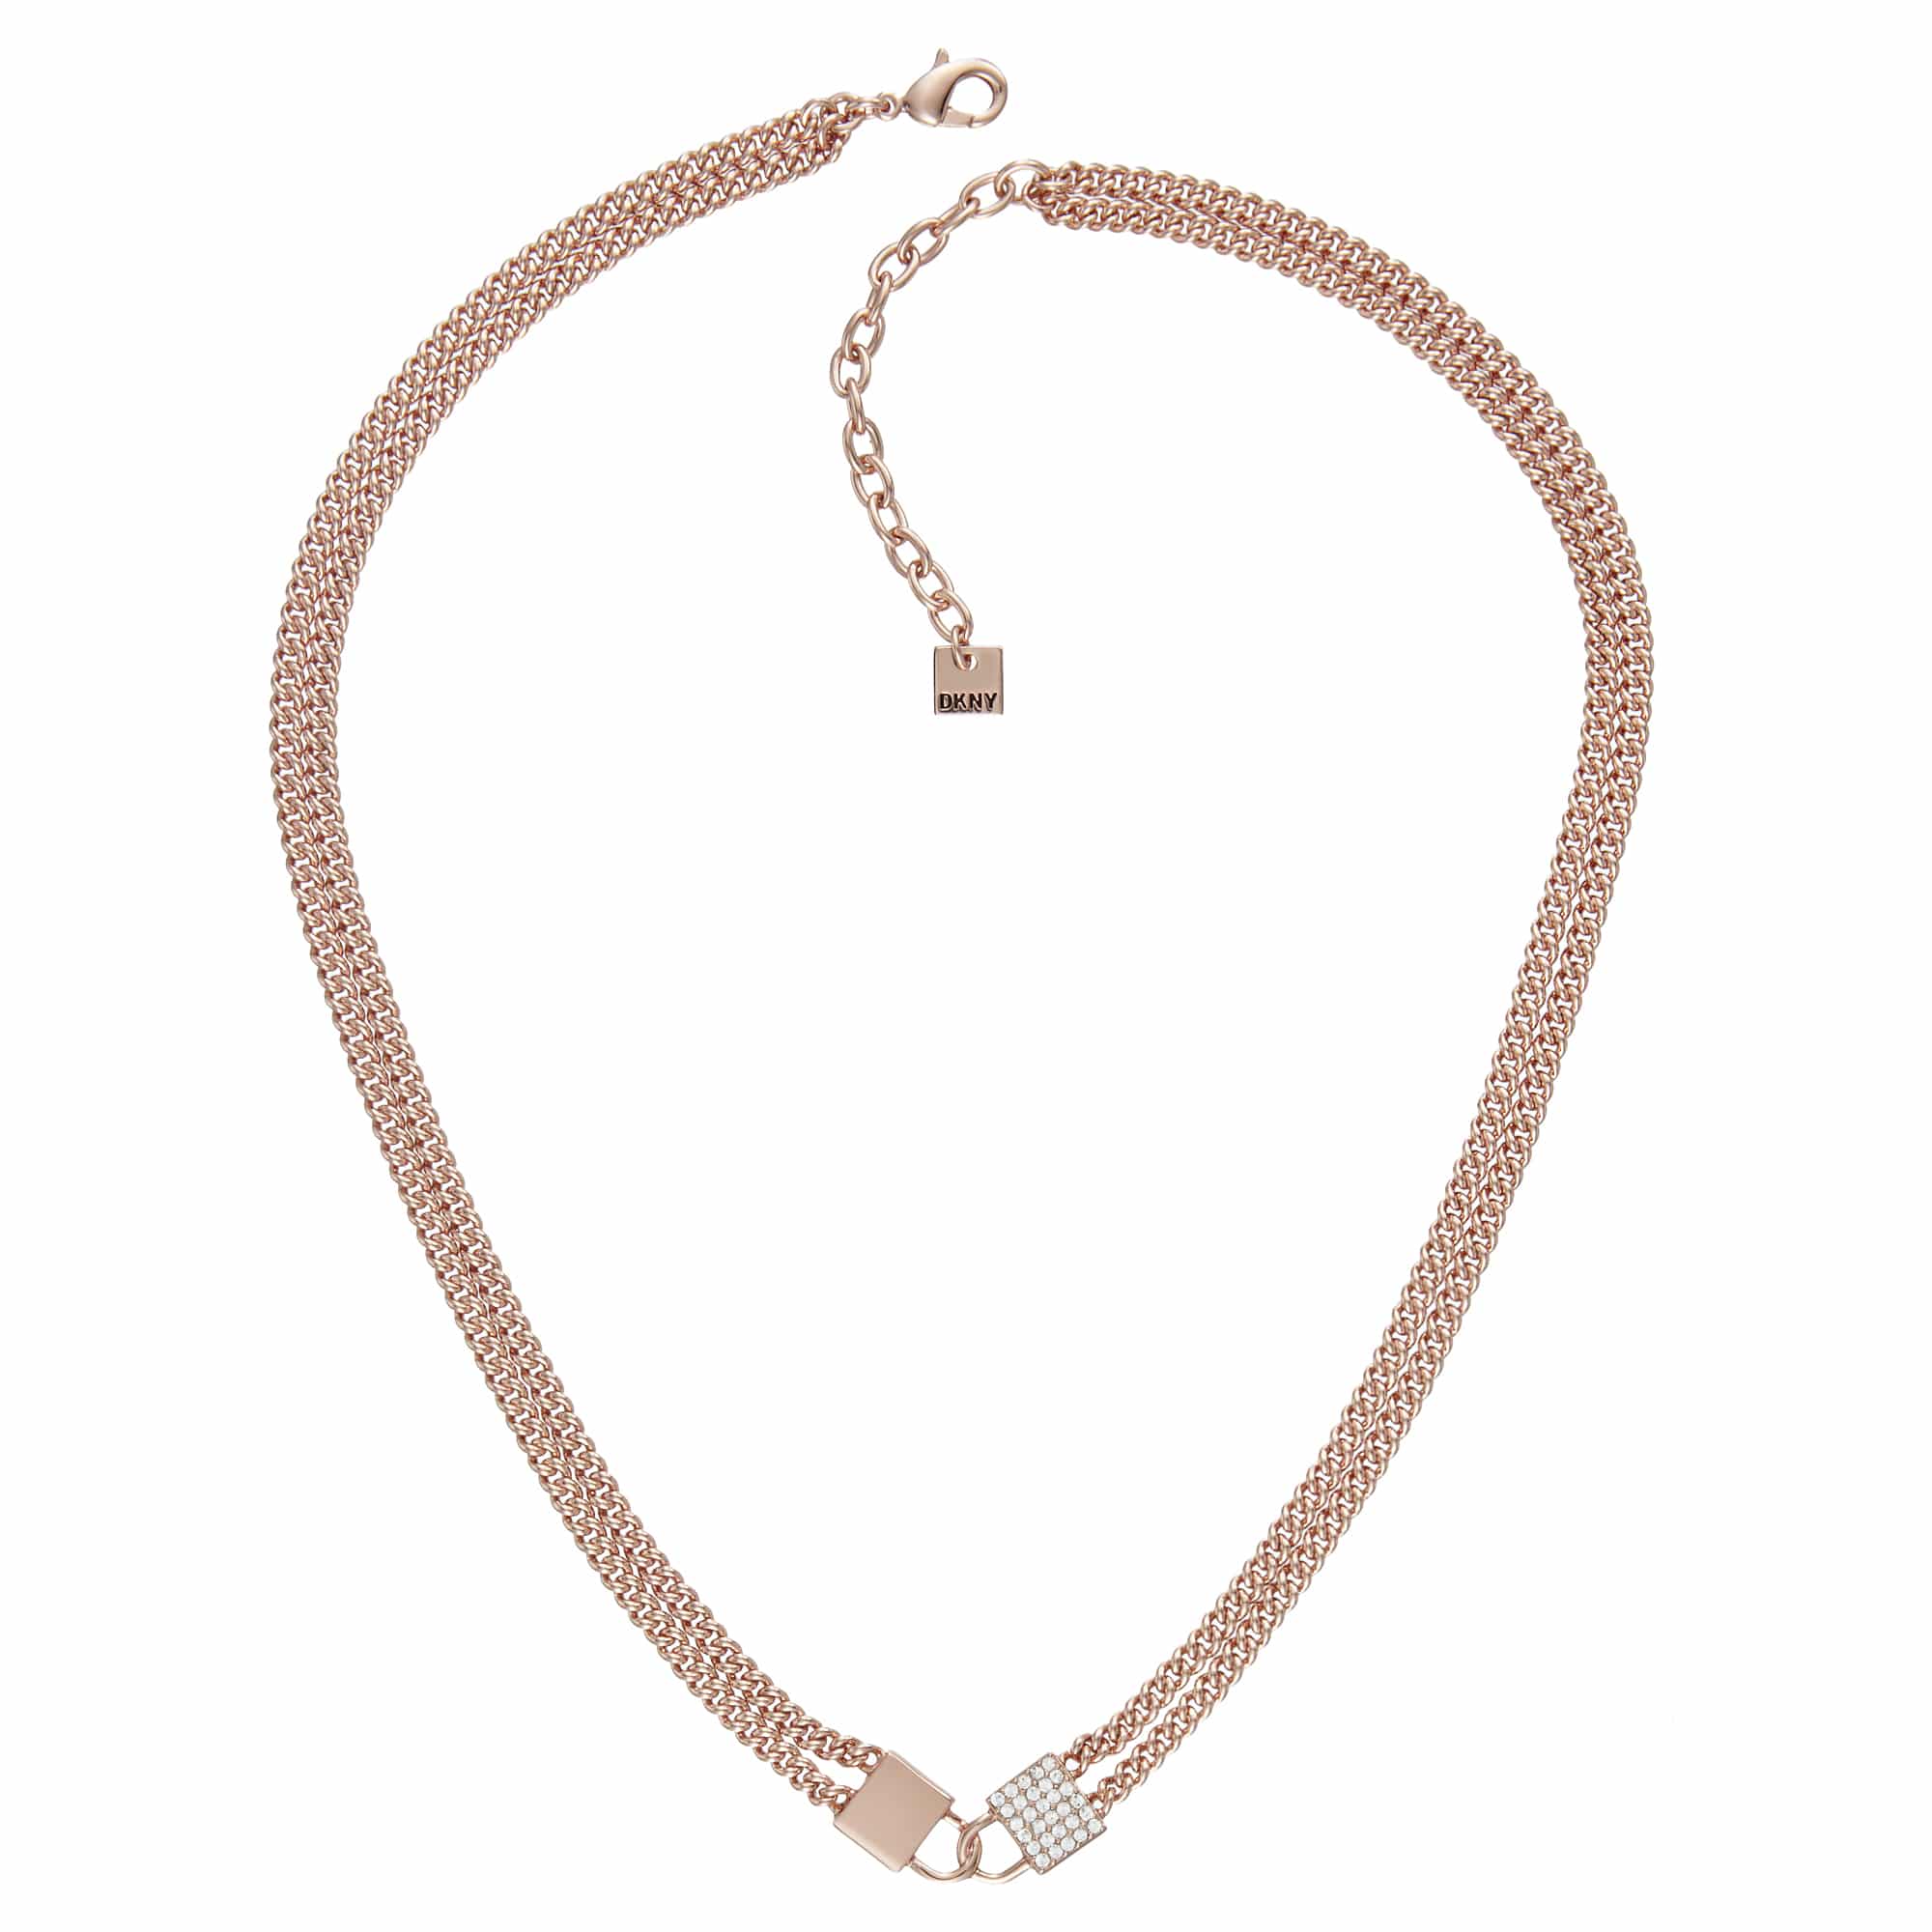 DKNY DOUBLE LOCK WOMAN NECKLACE ROSE GOLD - Sunlab Malta